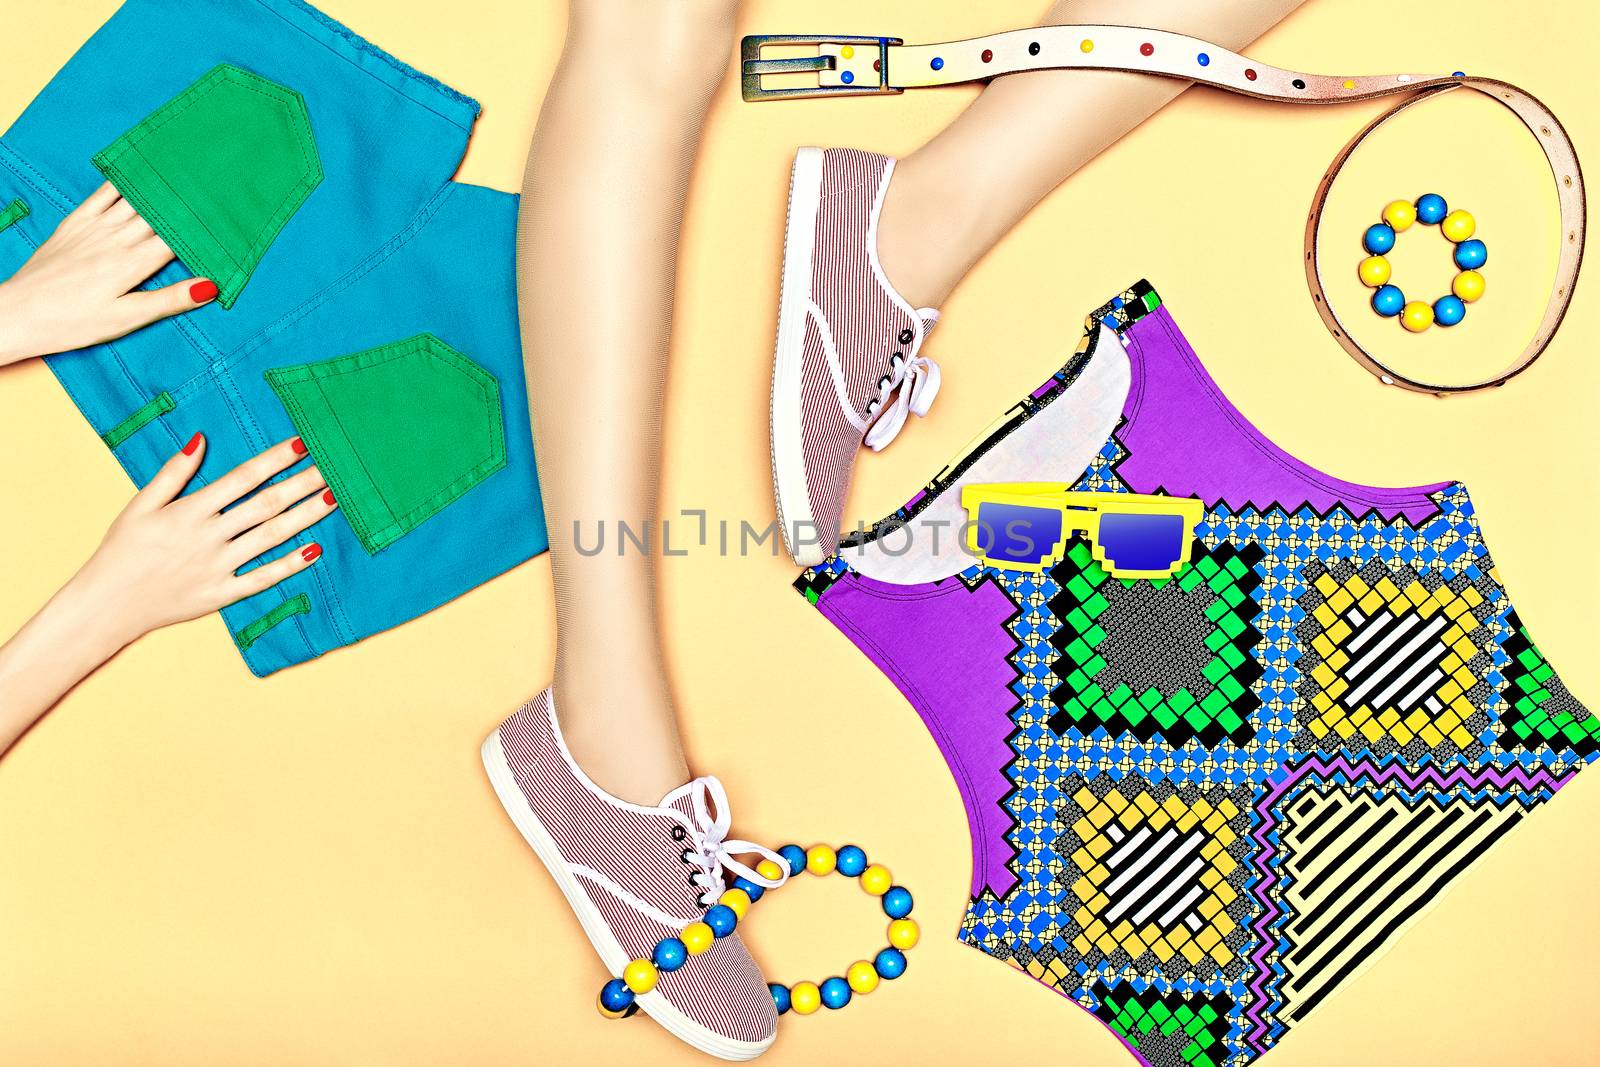 Fashion clothes stylish set, accessories, womans sexy legs, hands, people. Hipster girl creative look in trendy gumshoes, top, shorts, sunglasses, belt. Unusual vivid youth style on yellow, copyspace